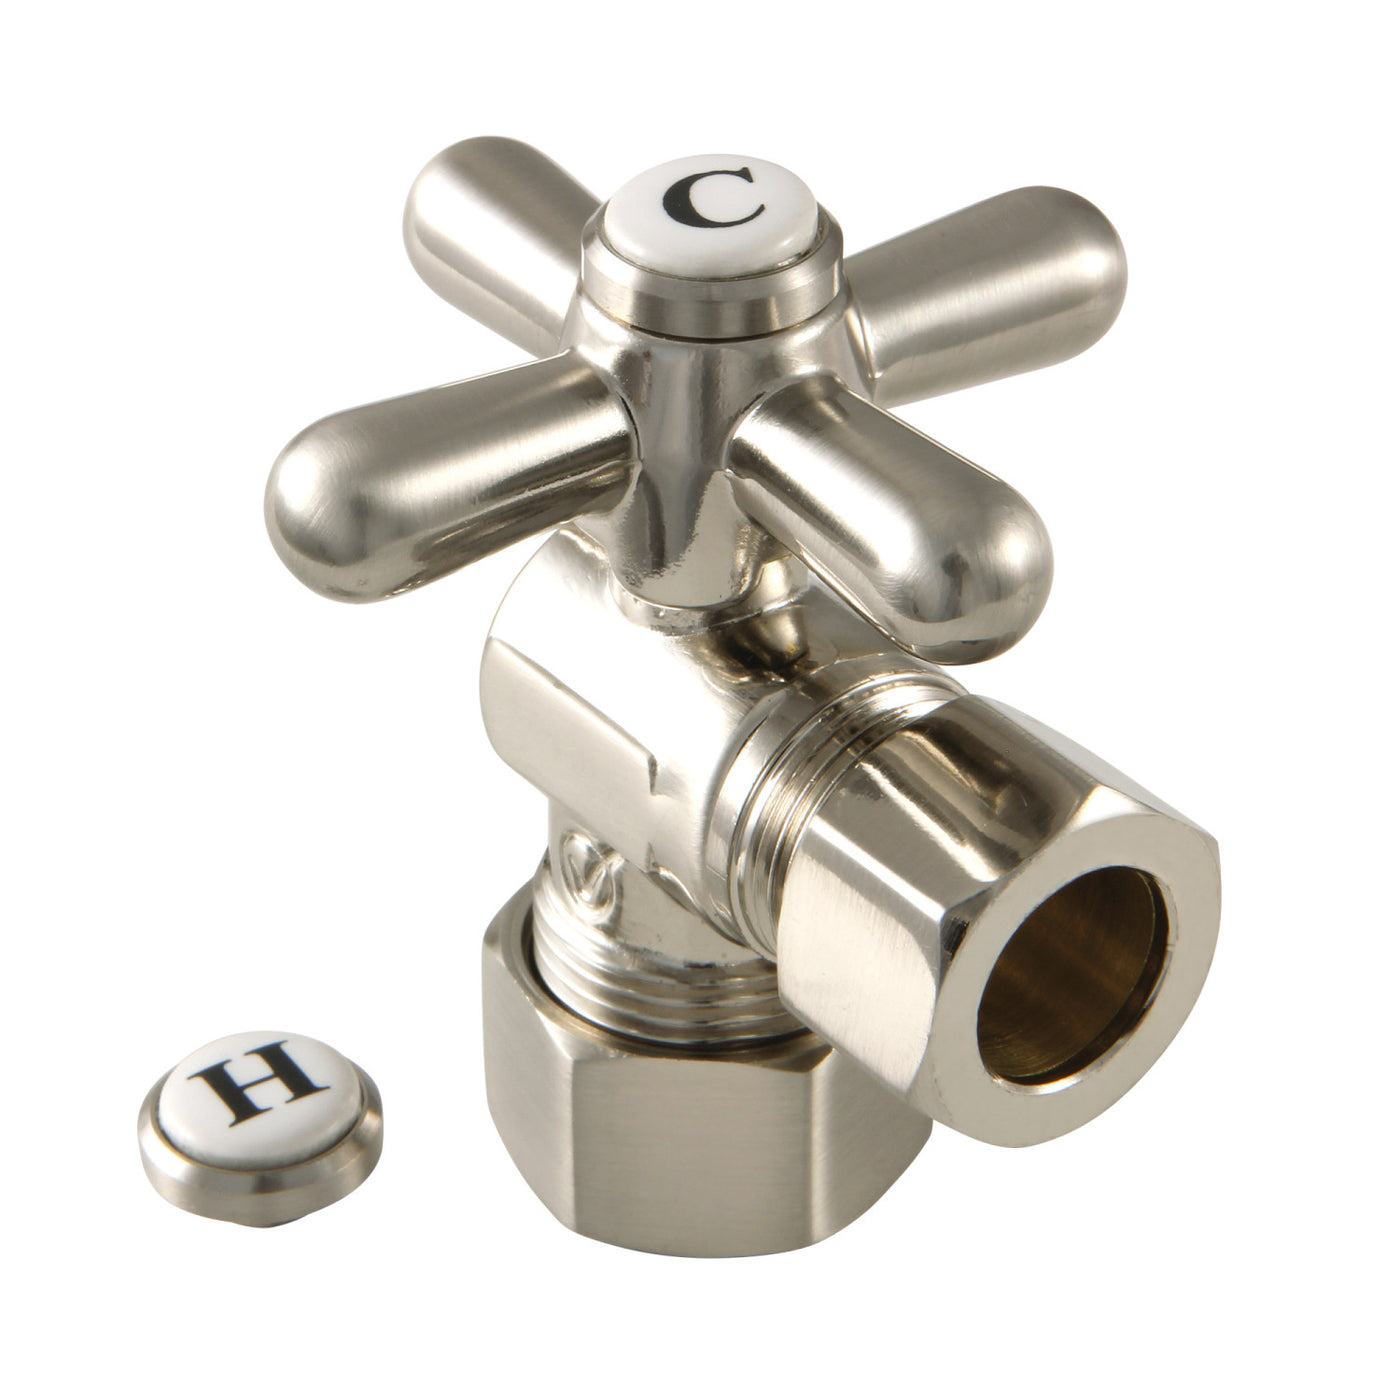 Elements of Design ECC54408X 5/8-Inch OD Comp x 1/2-Inch OD Comp Angle Stop Valve, Brushed Nickel